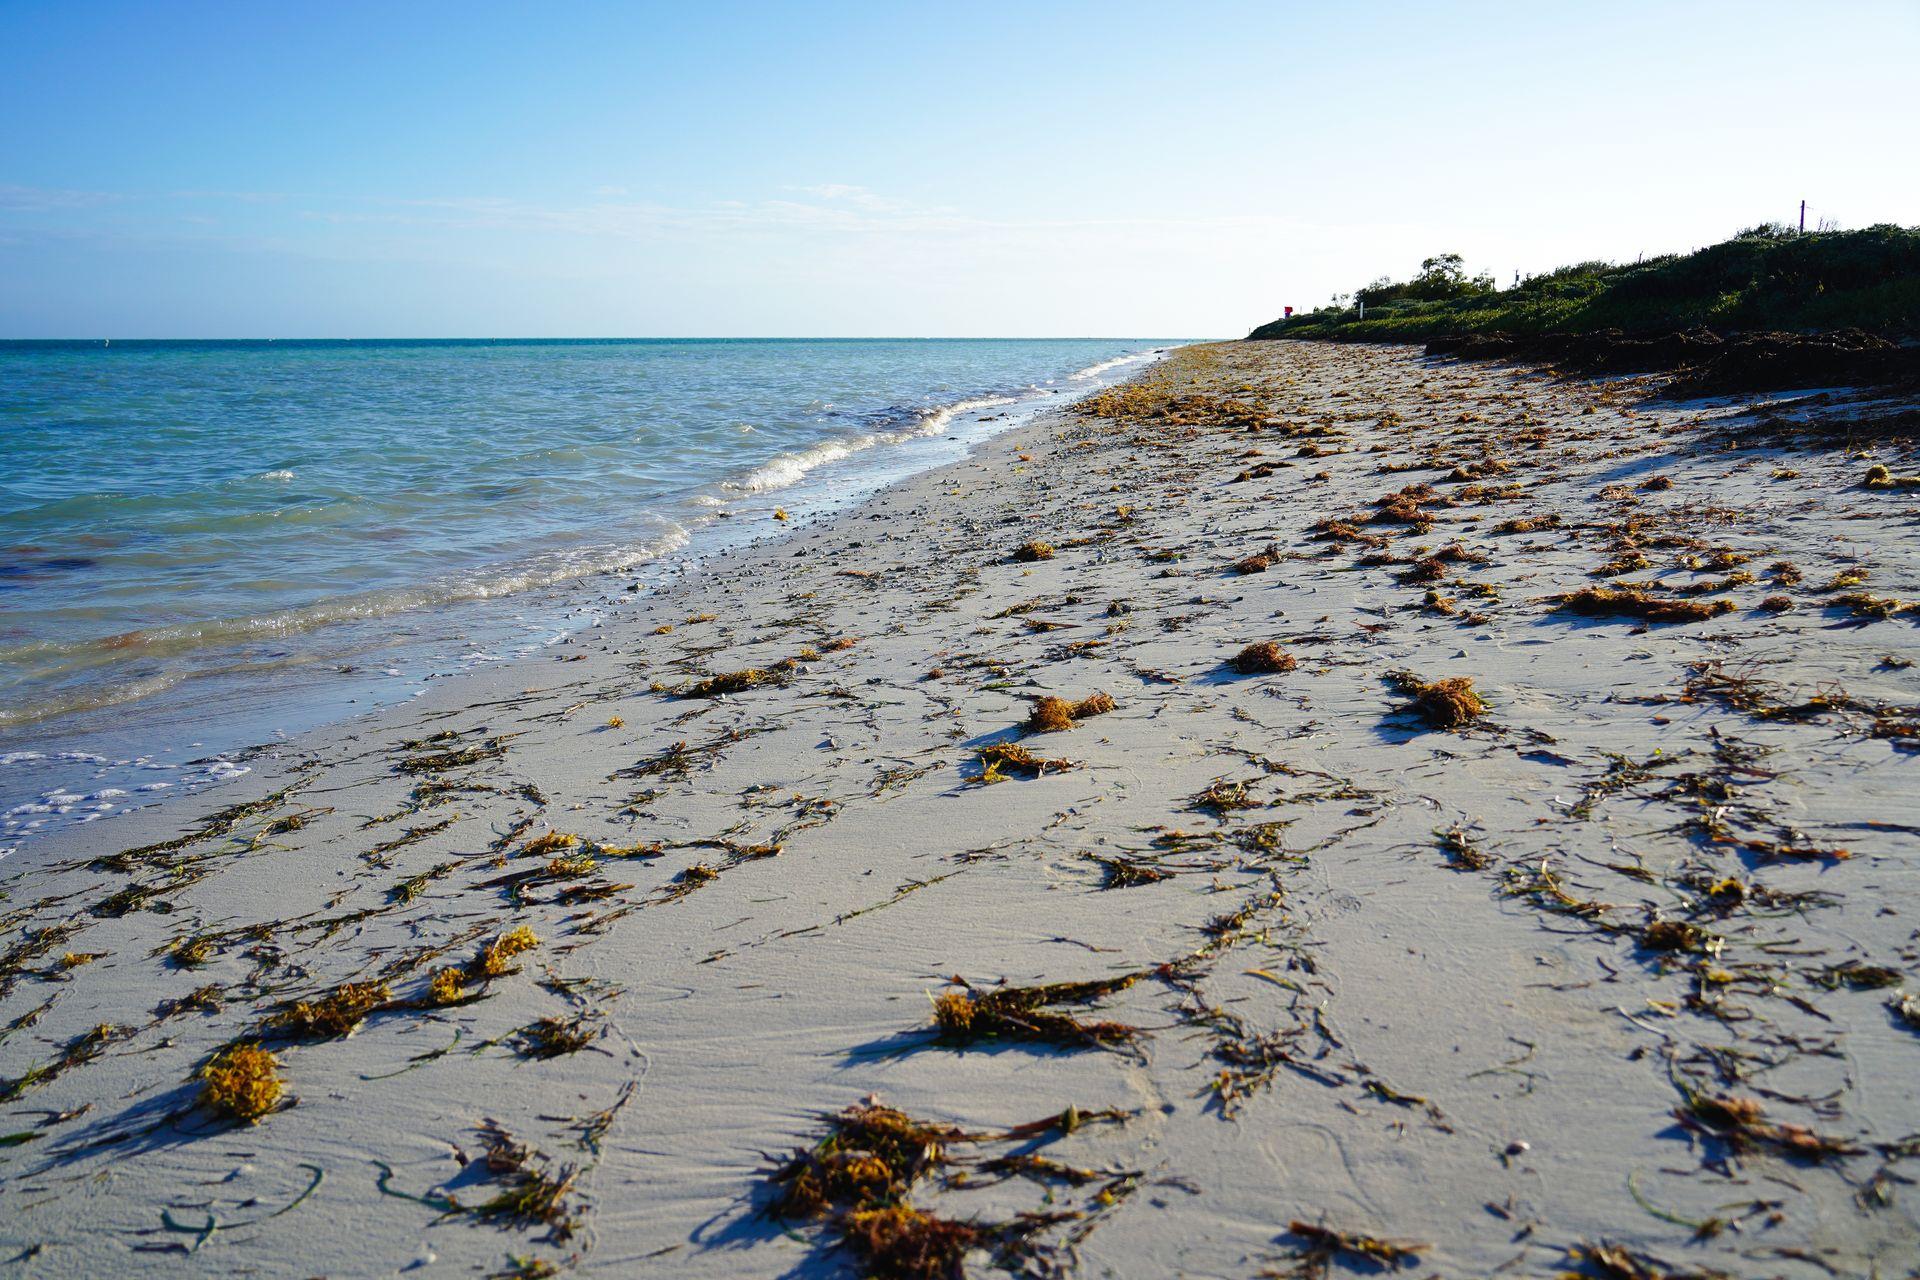 A close up of a beach with sea grass on the sand at Bahia Honda State Park